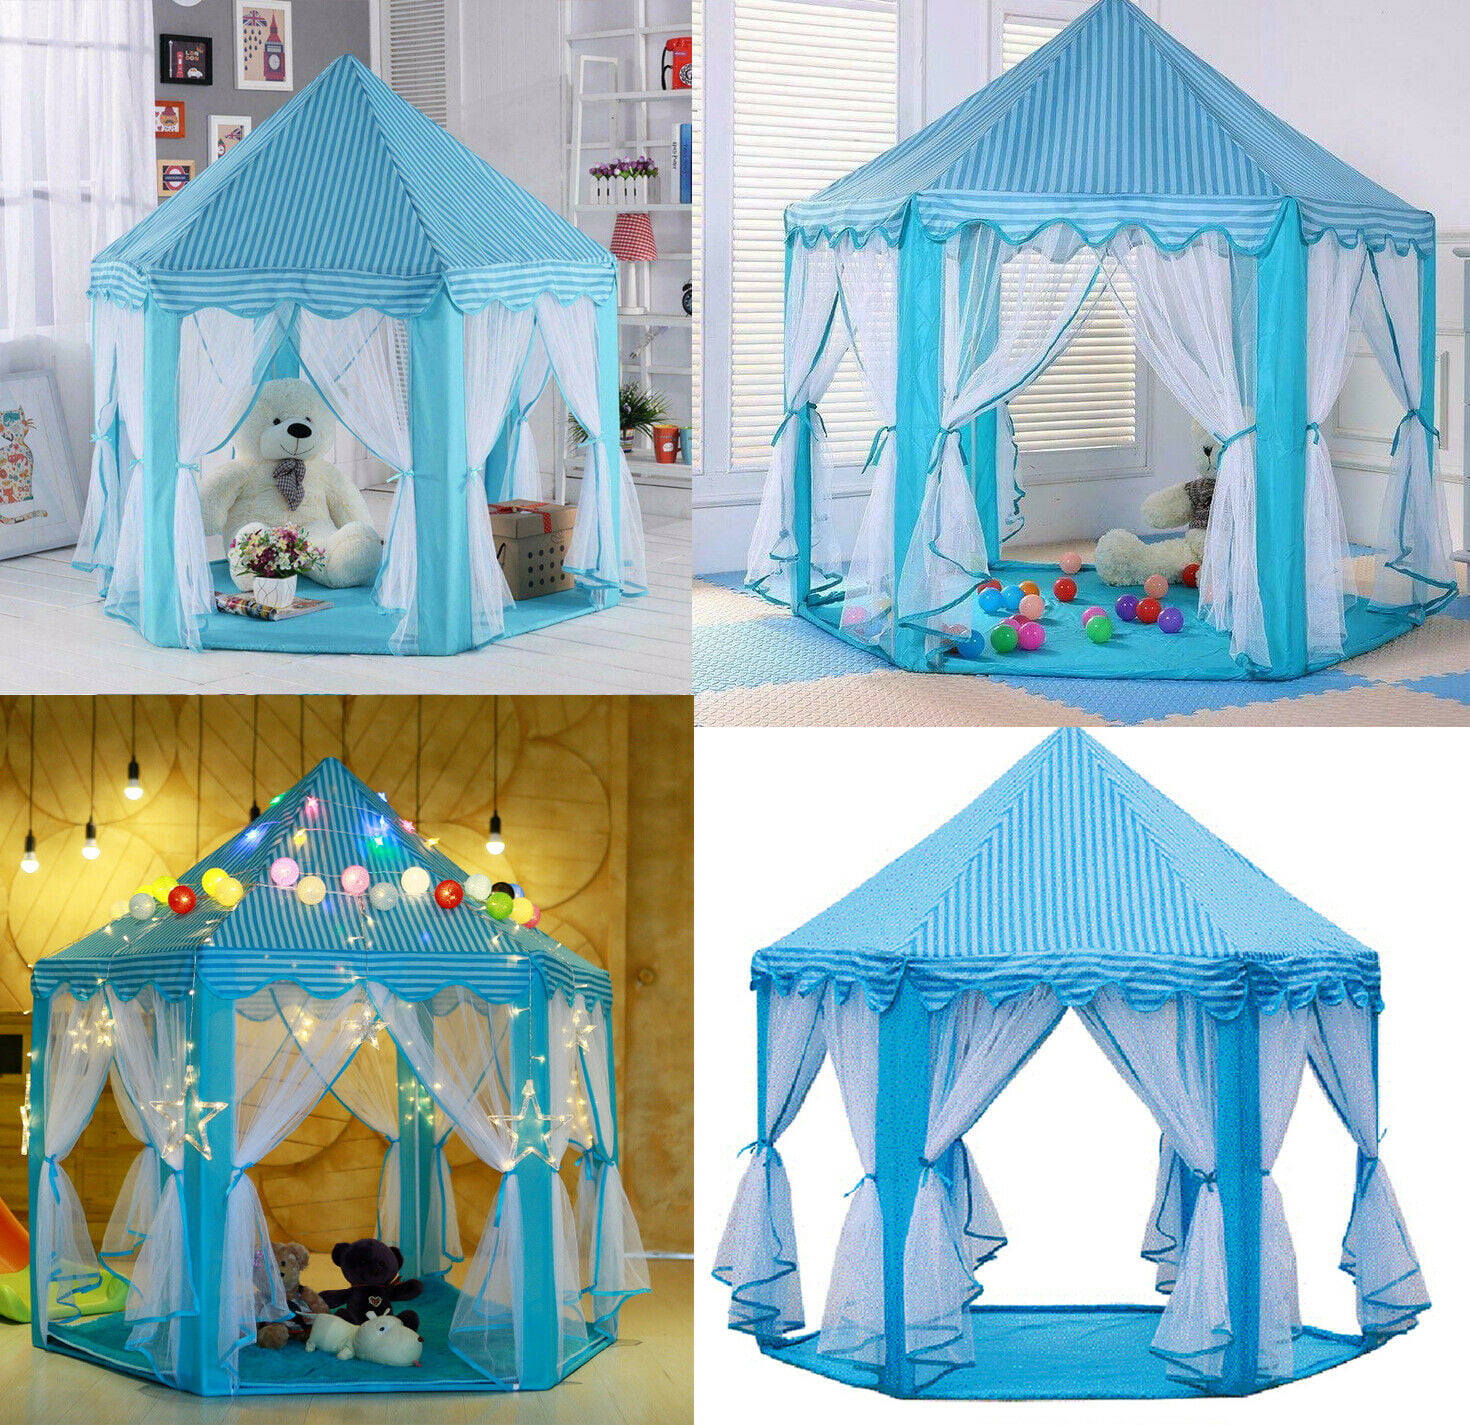 Tent Princess House Castle Girls Playhouse Kids In/Outdoor Fairy Play Tent Blue 